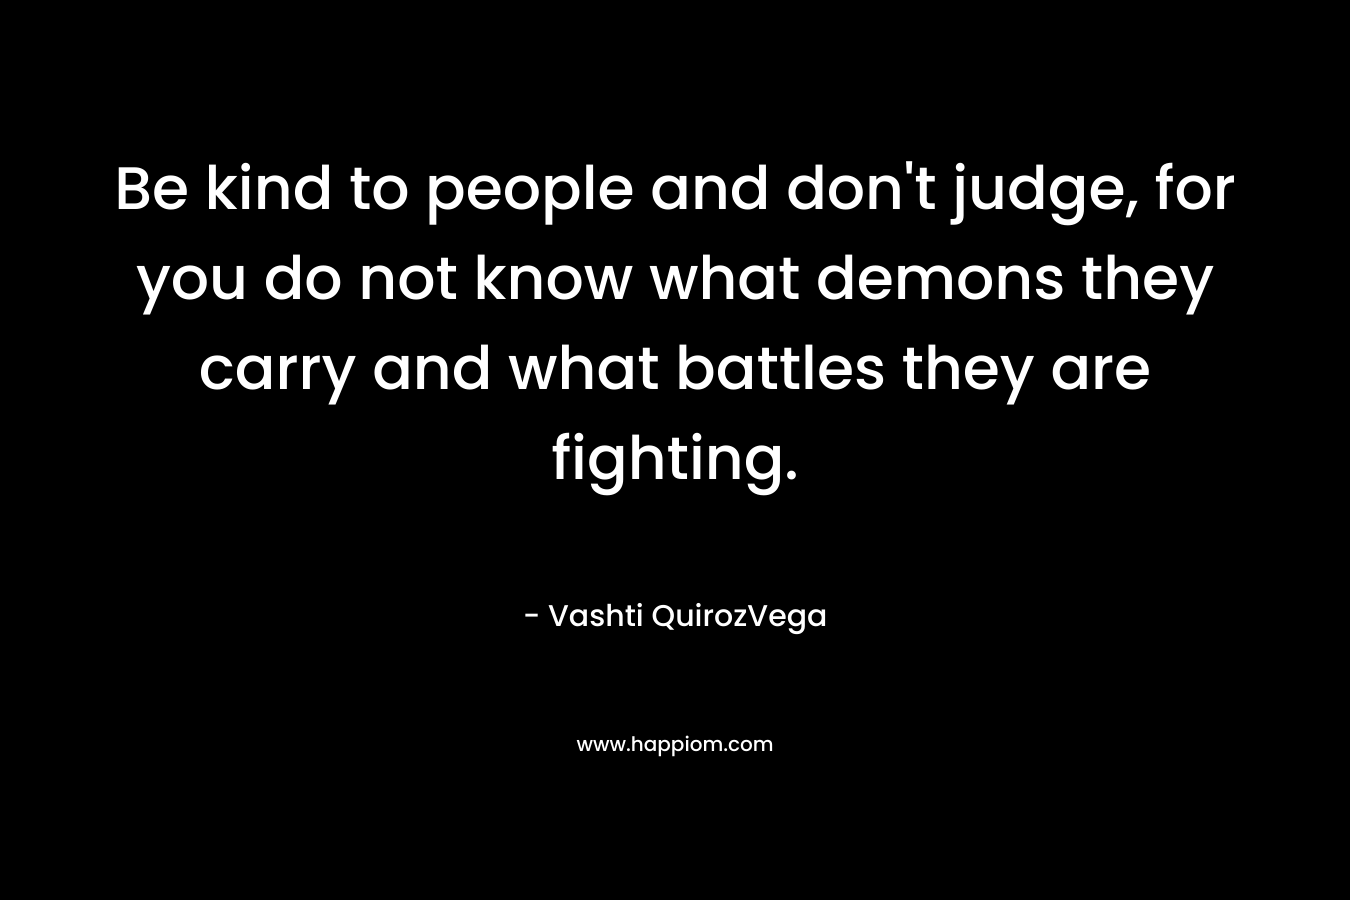 Be kind to people and don't judge, for you do not know what demons they carry and what battles they are fighting.